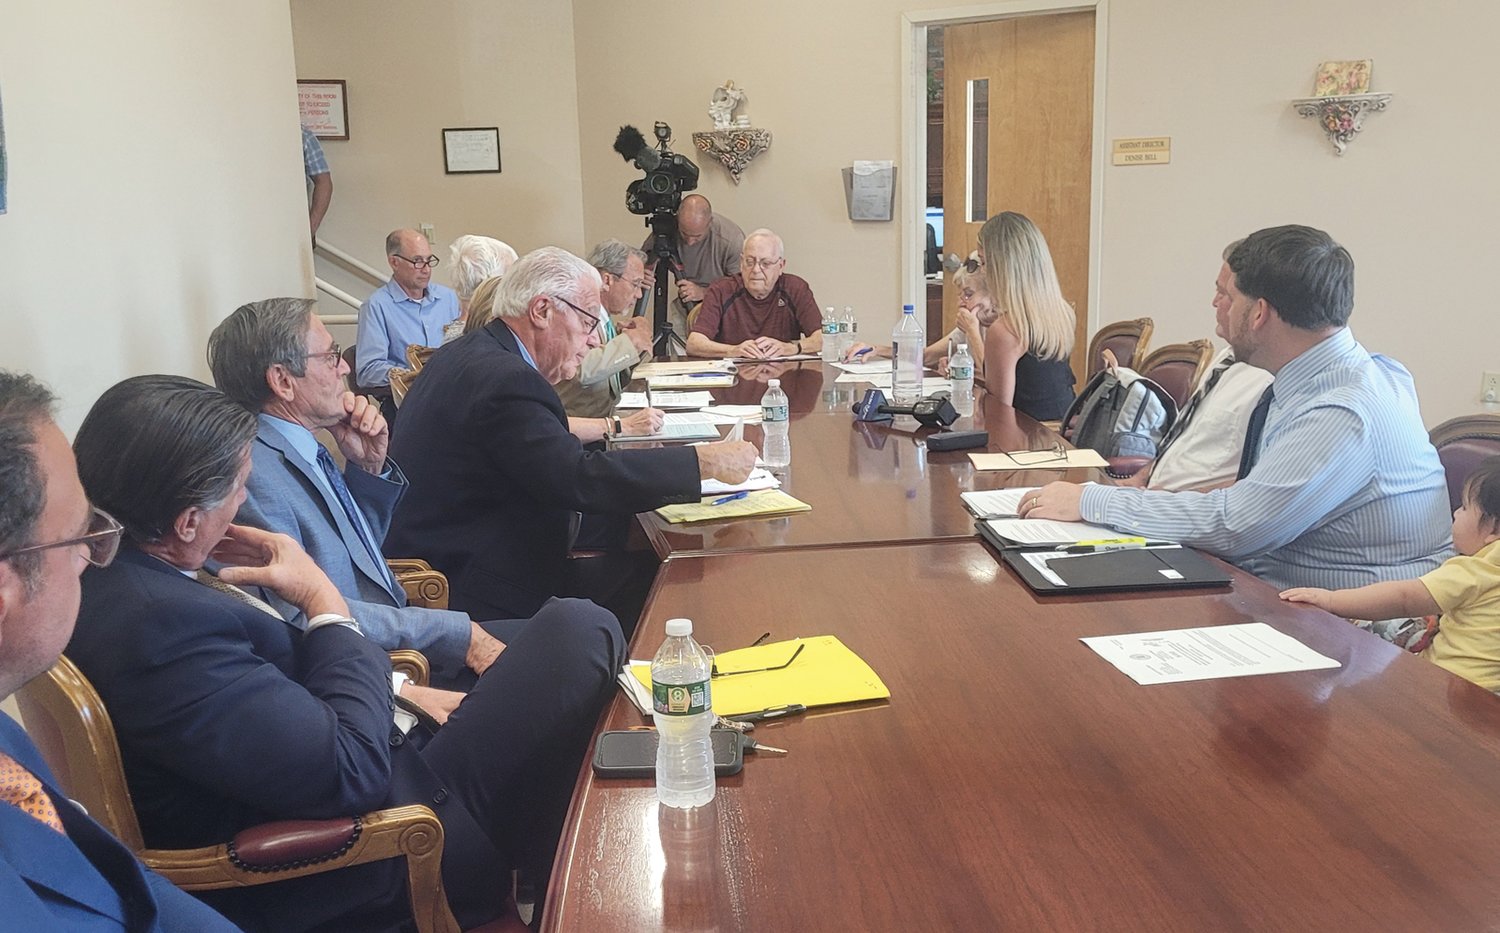 BRIEF HEARING: The Johnston Board of Canvassers soundly rejected Rep. Ed Cardillo’s residency complaint he filed against his nephew and opponent Dennis Cardillo. Dennis Cardillo insists he lives within District 42. Rep. Ed Cardillo insists the challenger is lying and has vowed to file a new complaint with the board.